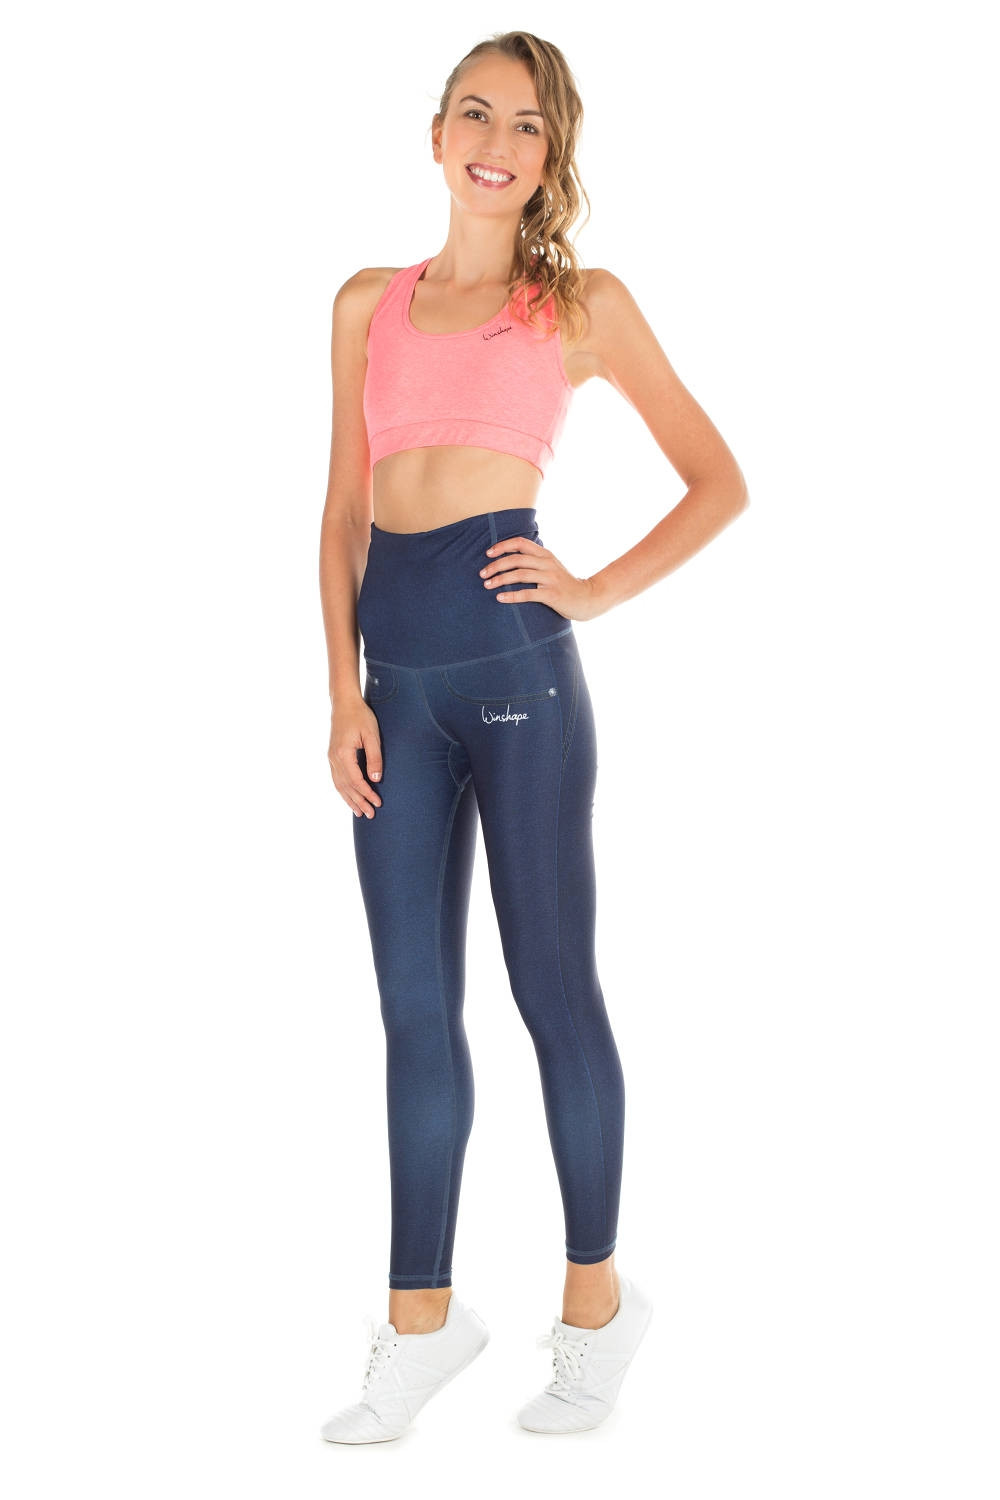 Functional Style Slim Jeans Waist blue, Tights Winshape High rich Shape “Bootylicious” HWL102, Power